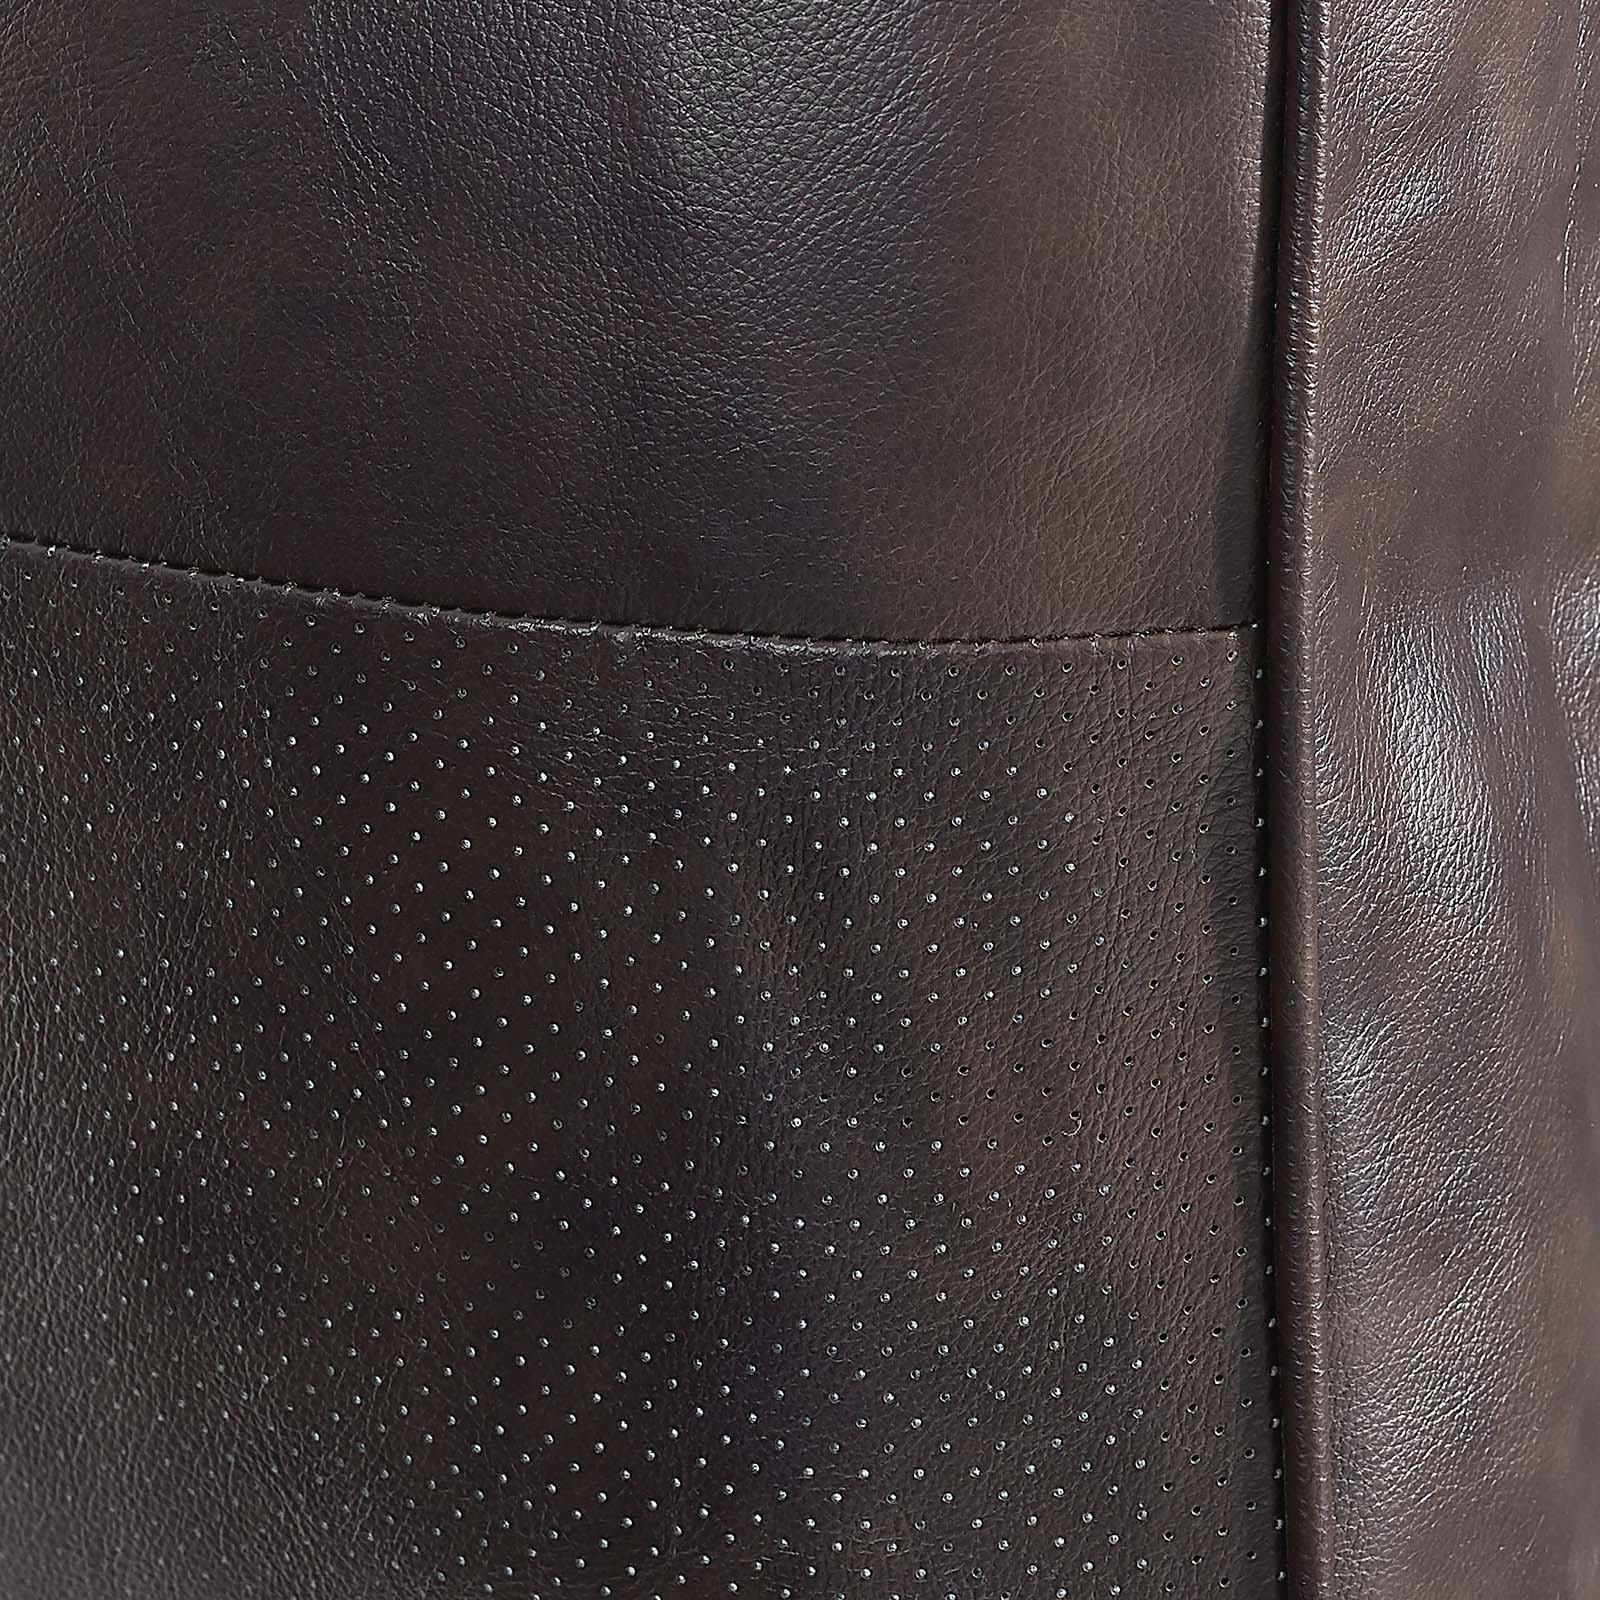 Valour Leather Armchair - East Shore Modern Home Furnishings